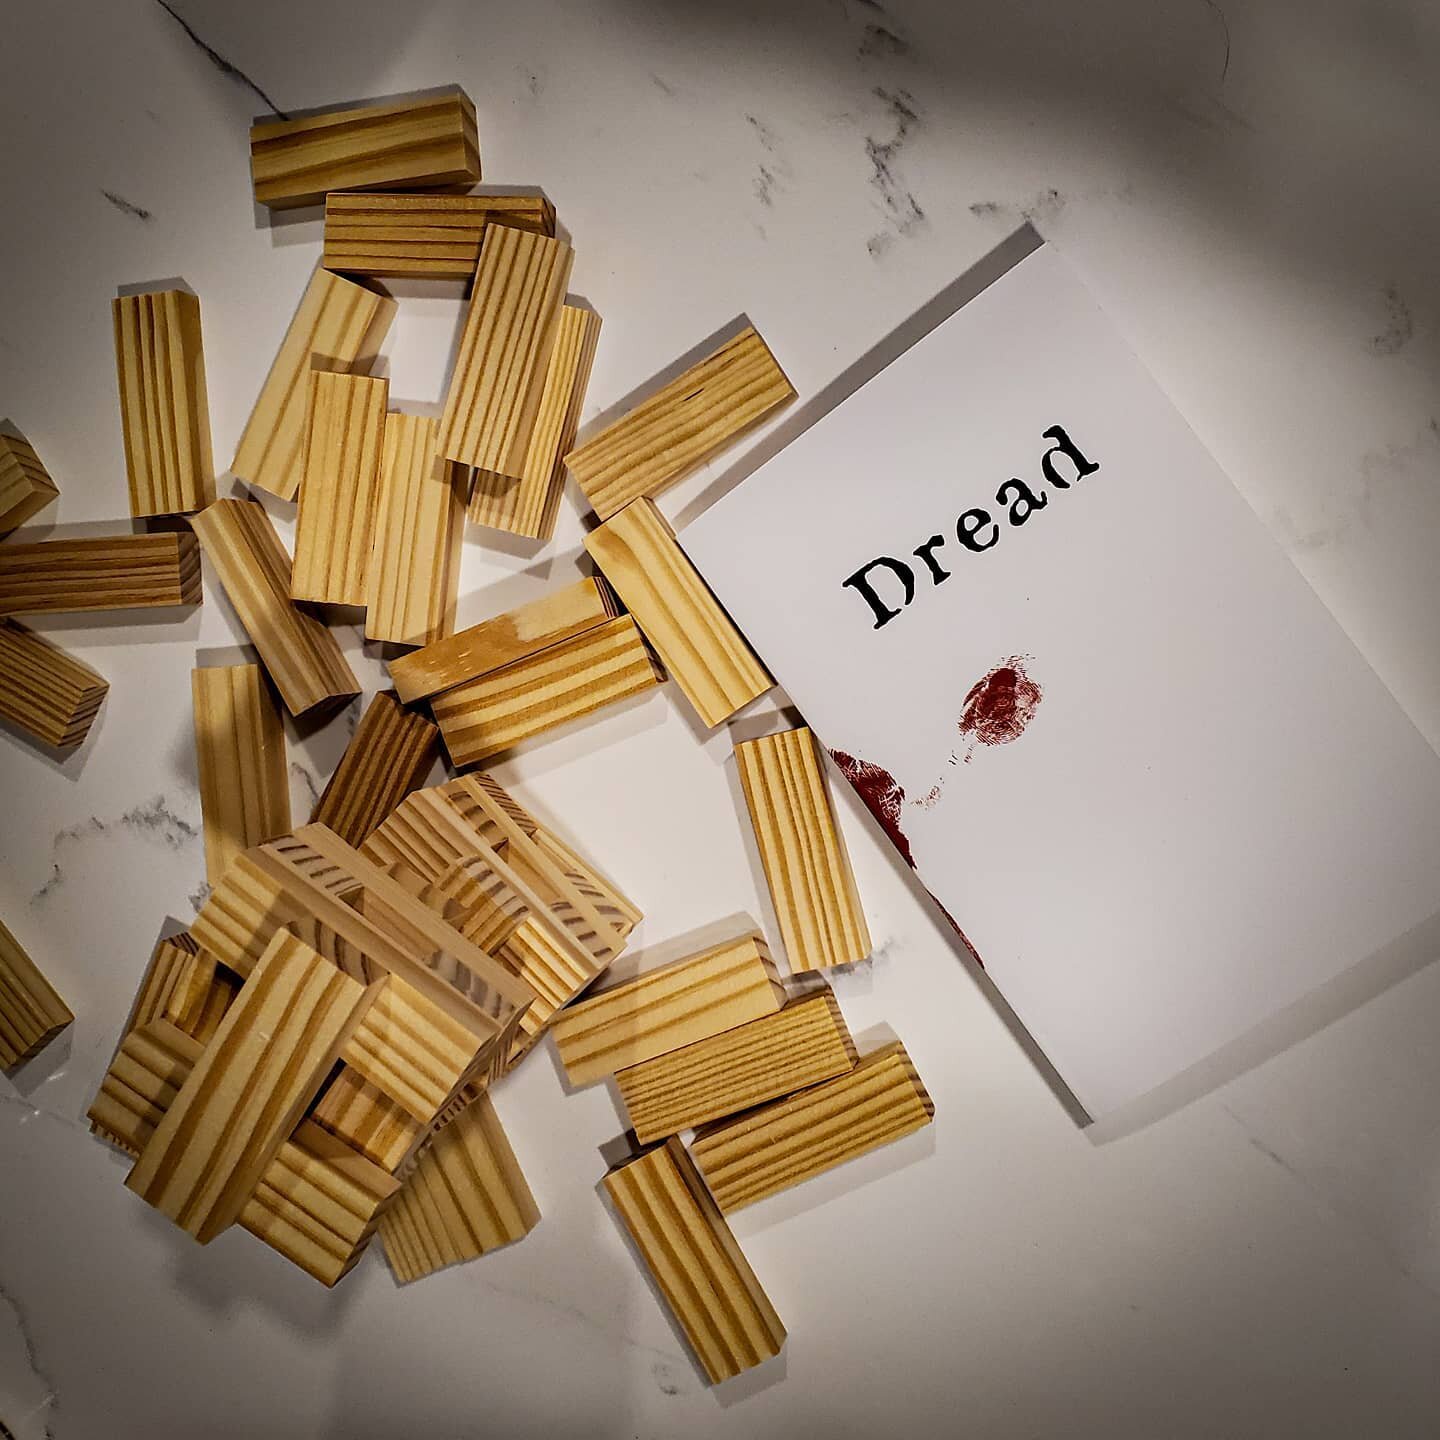 Tonight we played Dread for the first time. I loved it. It took me back to the old RPG days. I love a good horror game, especially when I control the narrative. Instead of dice you have a Jenga tower to define success and failure. Tower falls, you di